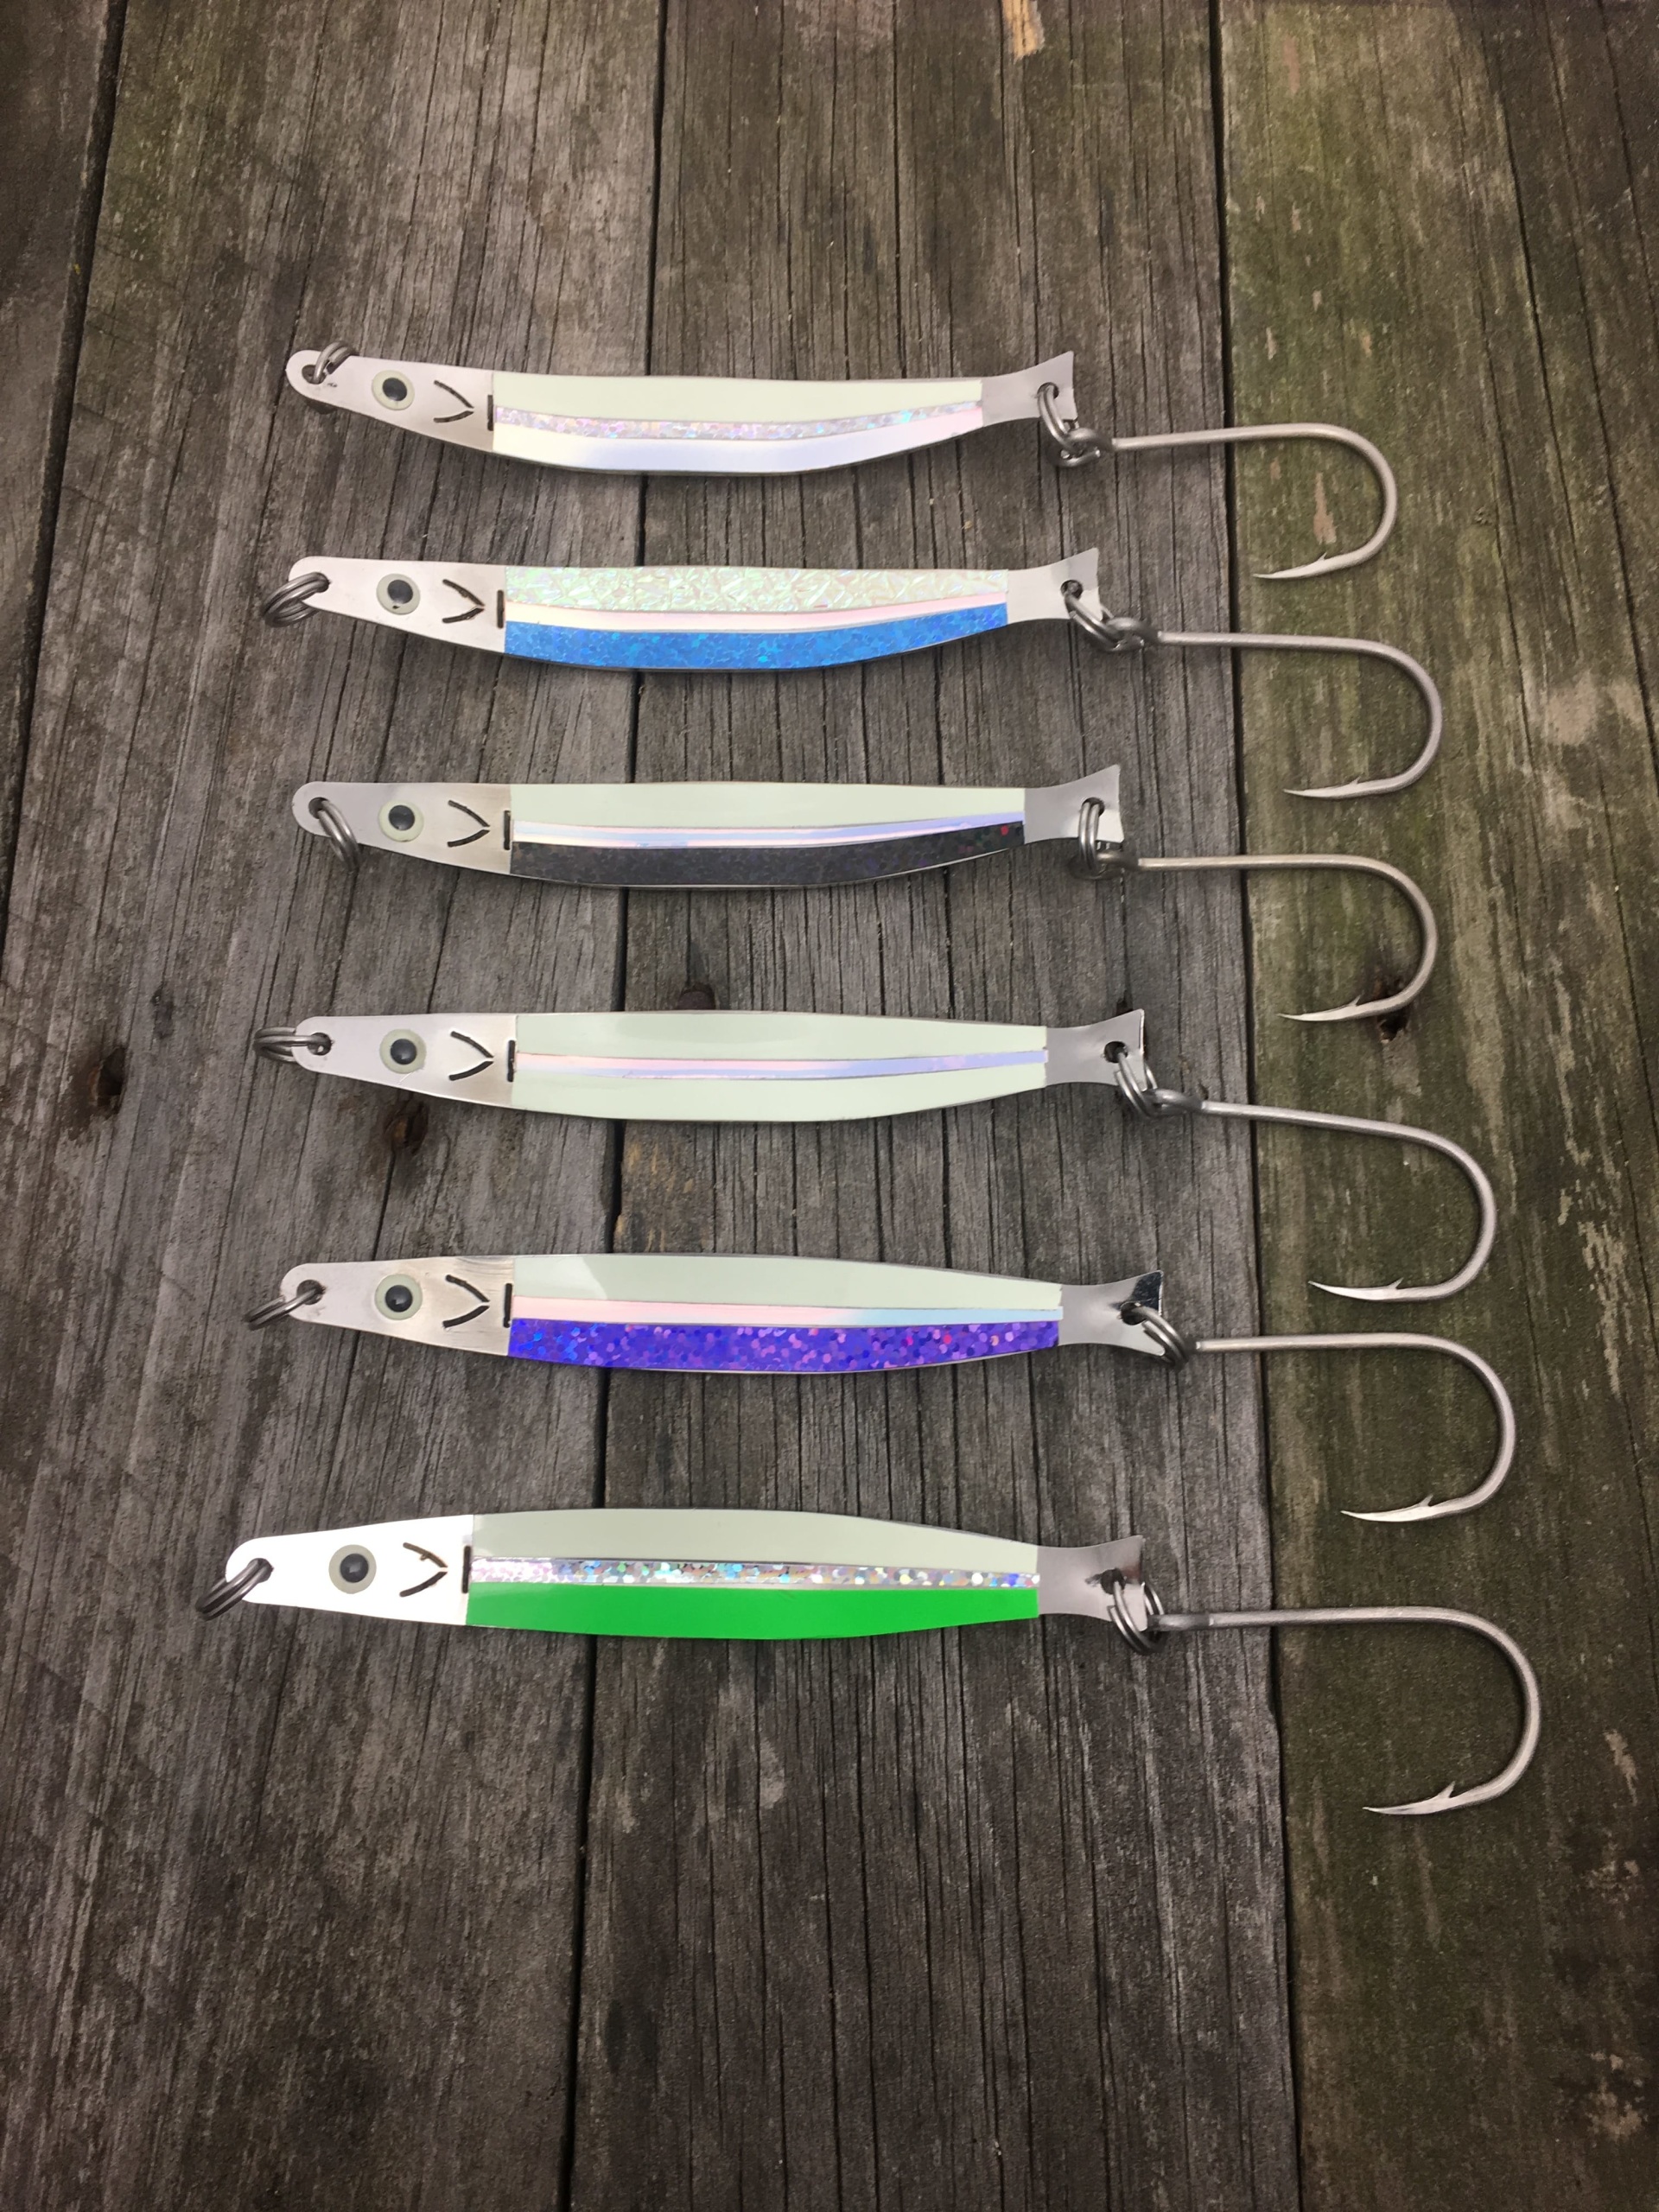 SP-1GL The Extreme Glow 6 pack of 4.5 needlefish lures